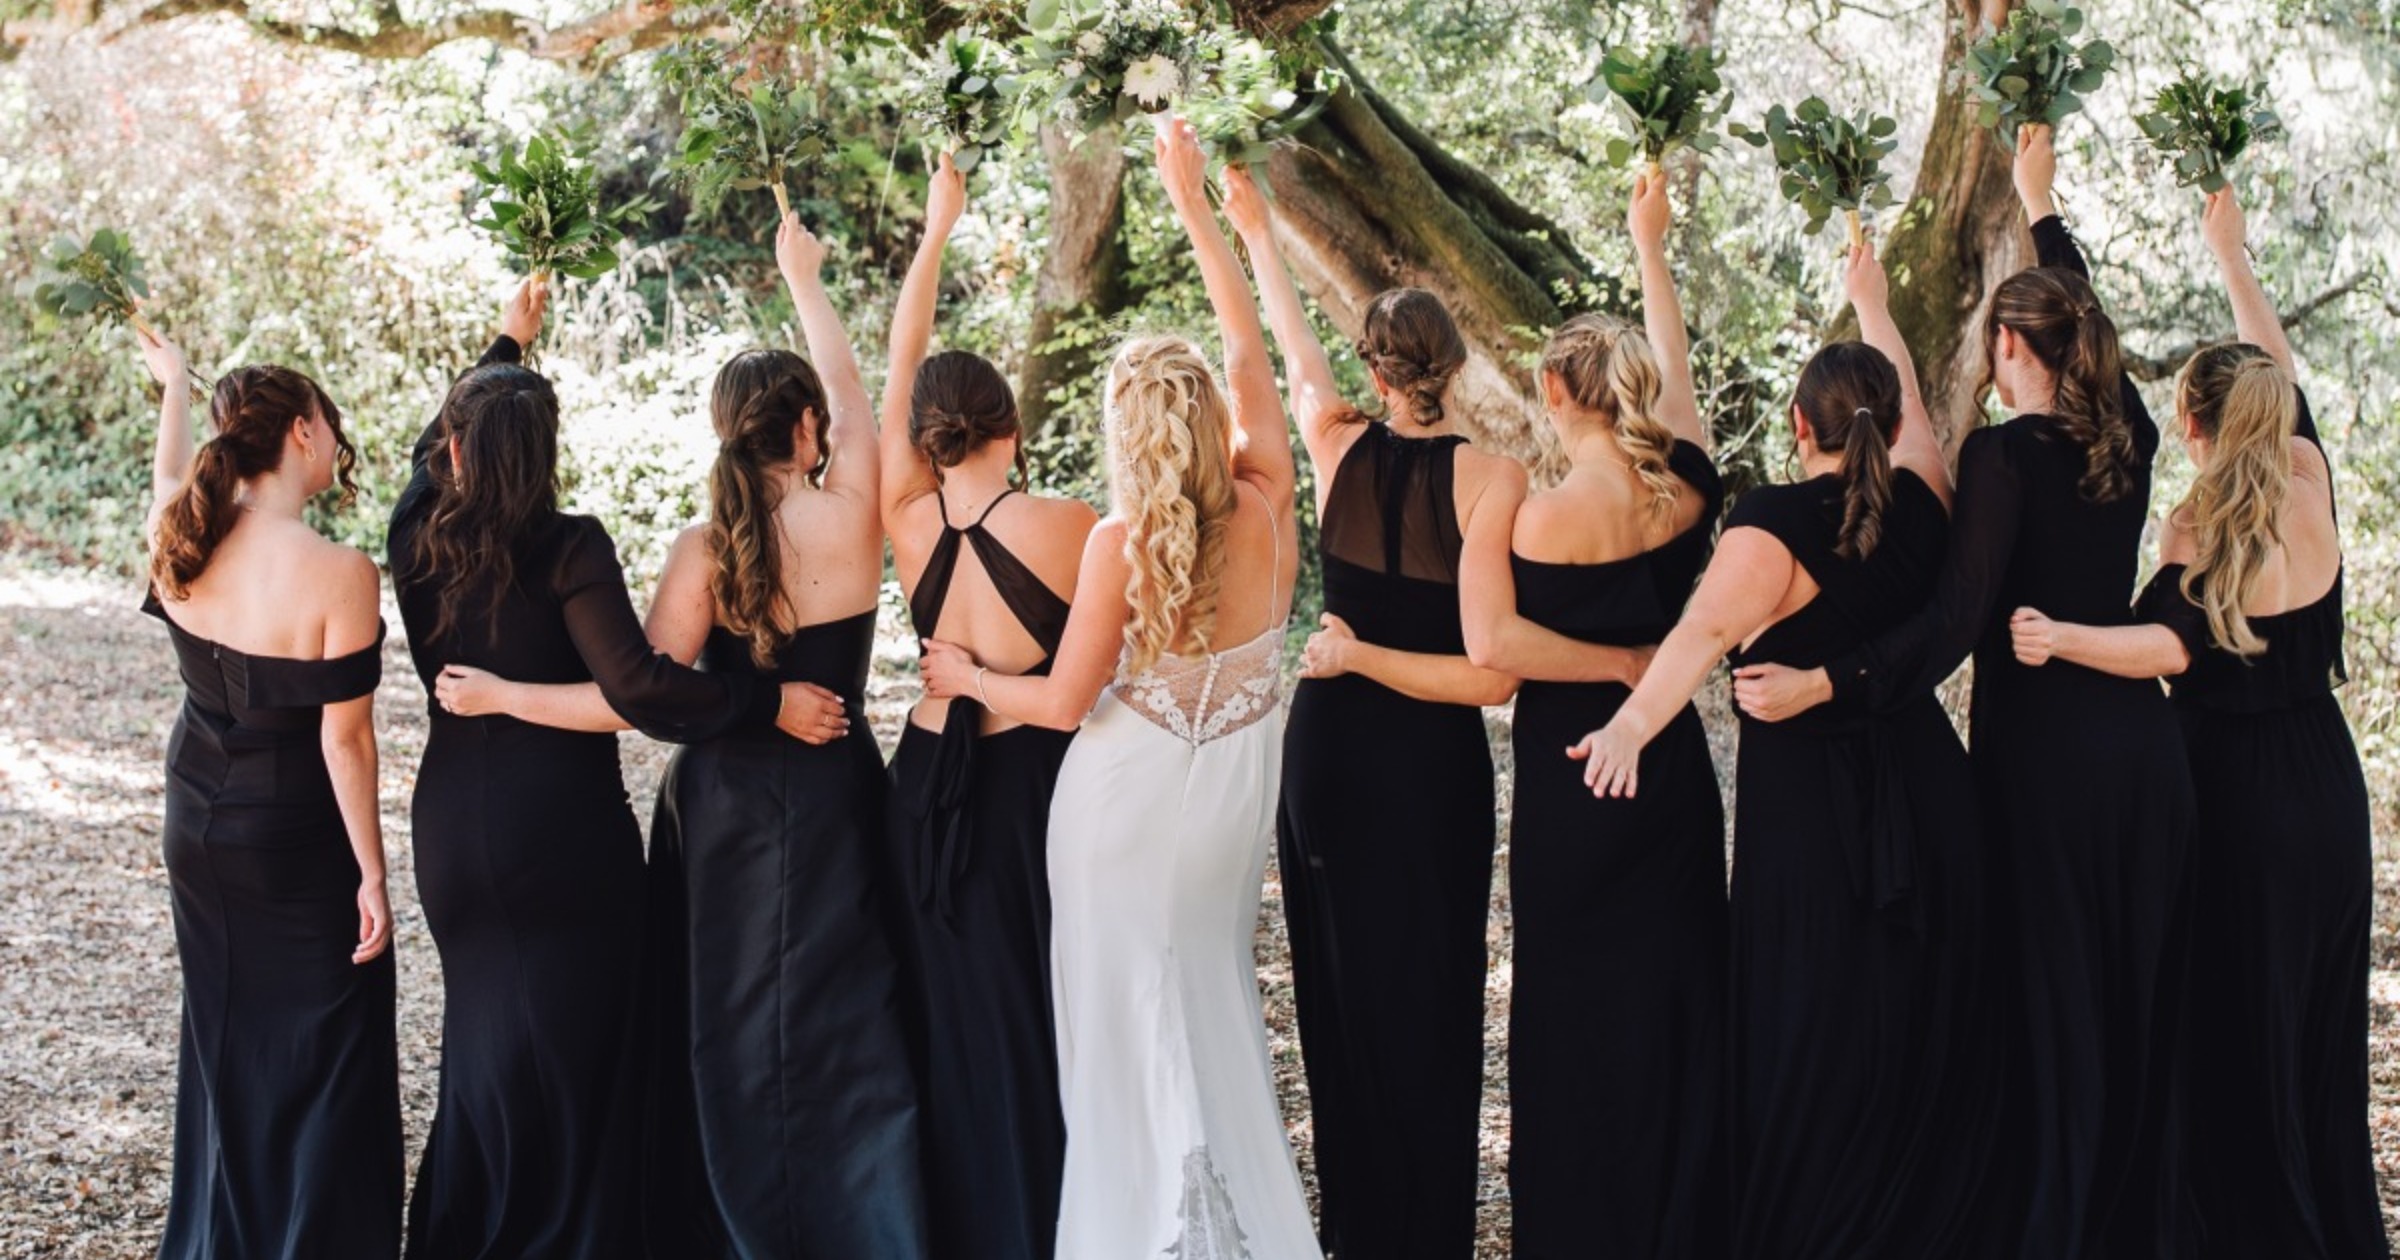 The Coastal Redwoods Is Our New Fave Wedding Destination